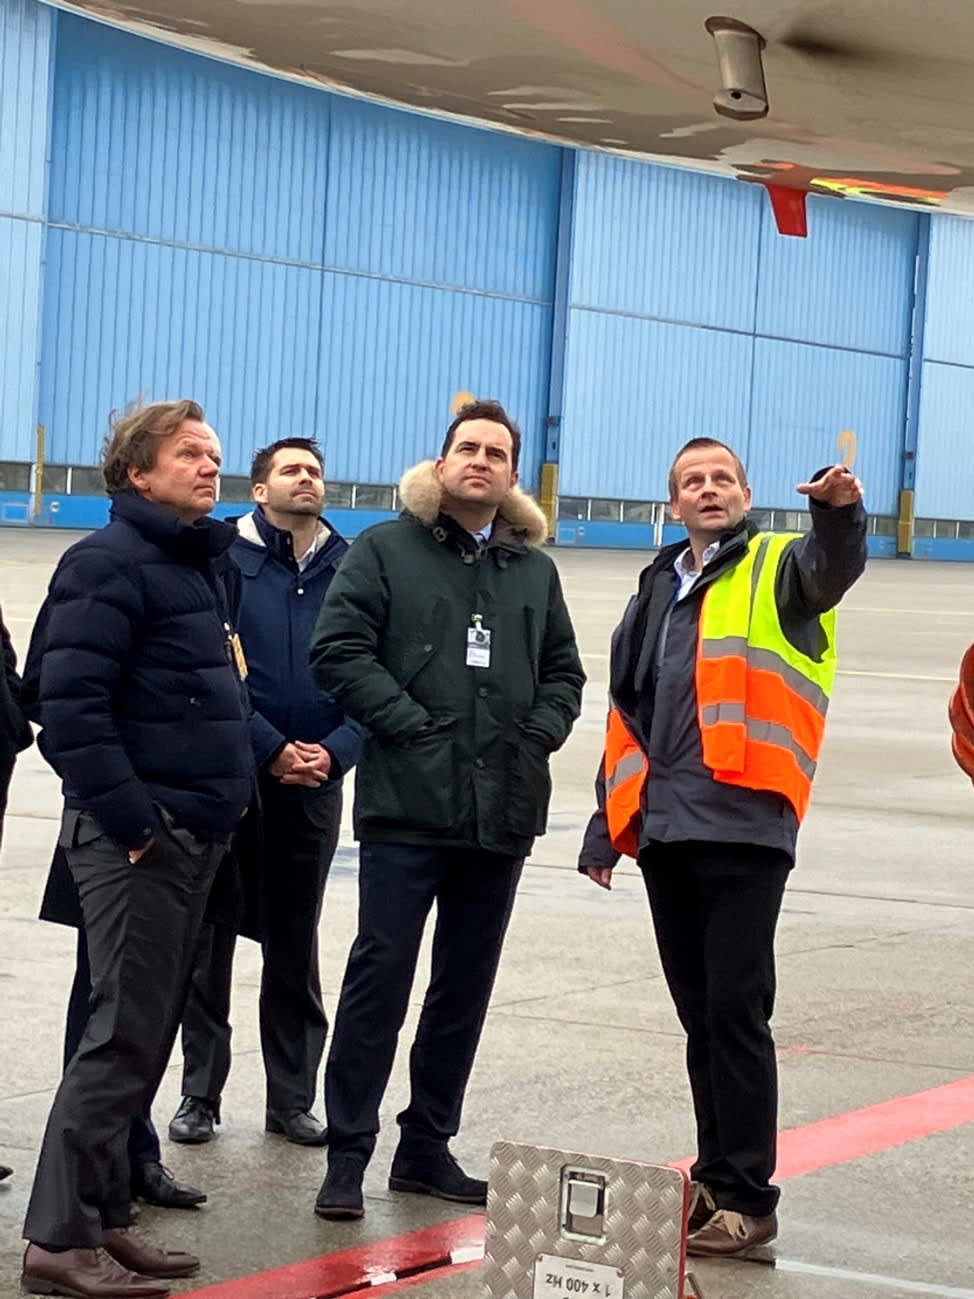 Visit to Lufthansa modernization projects shows SESAR Deployment in Germany